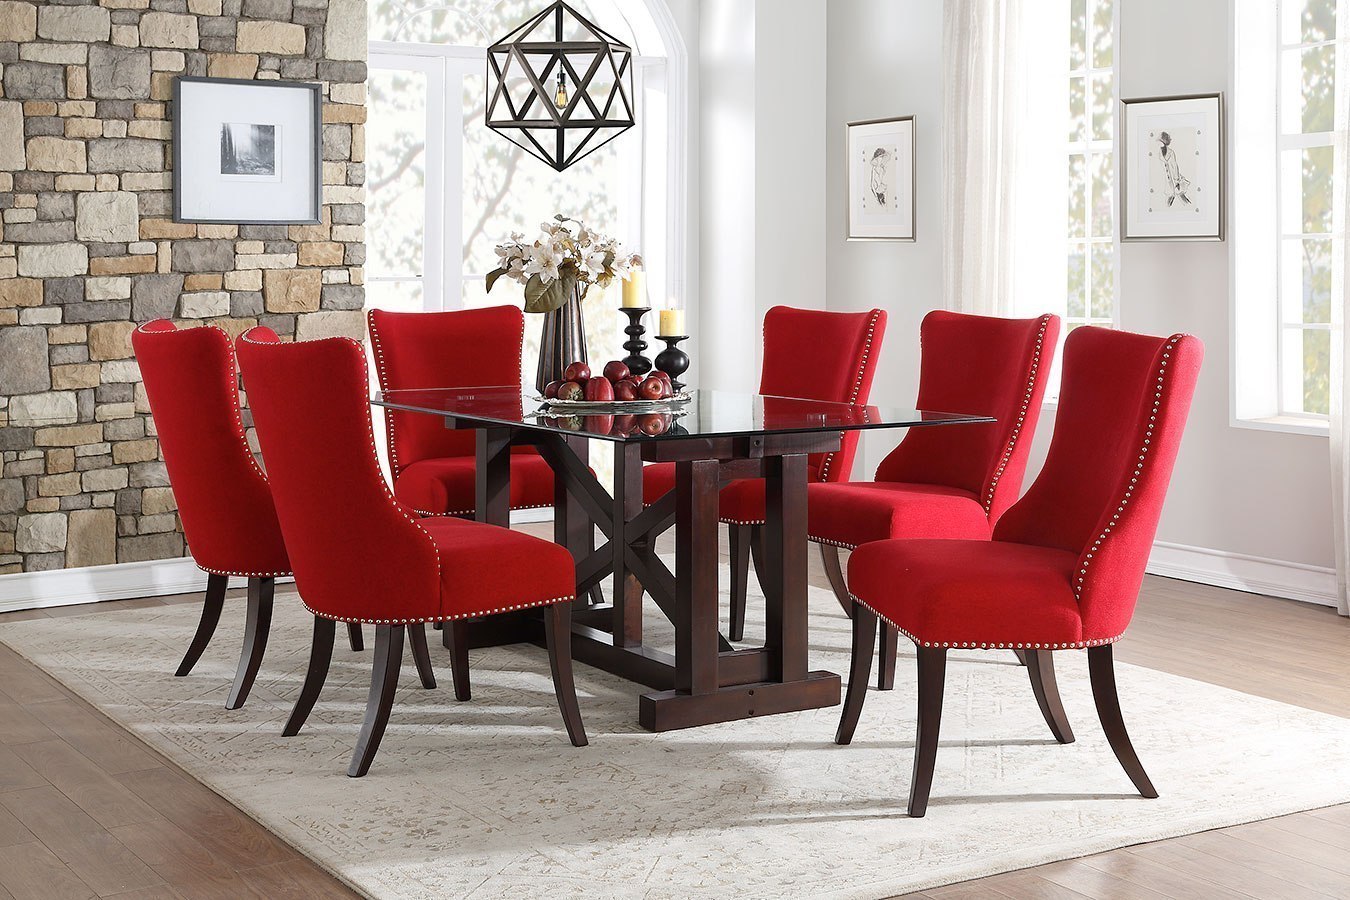 Salema Dining Room Set W Red Chairs By Homelegance FurniturePick